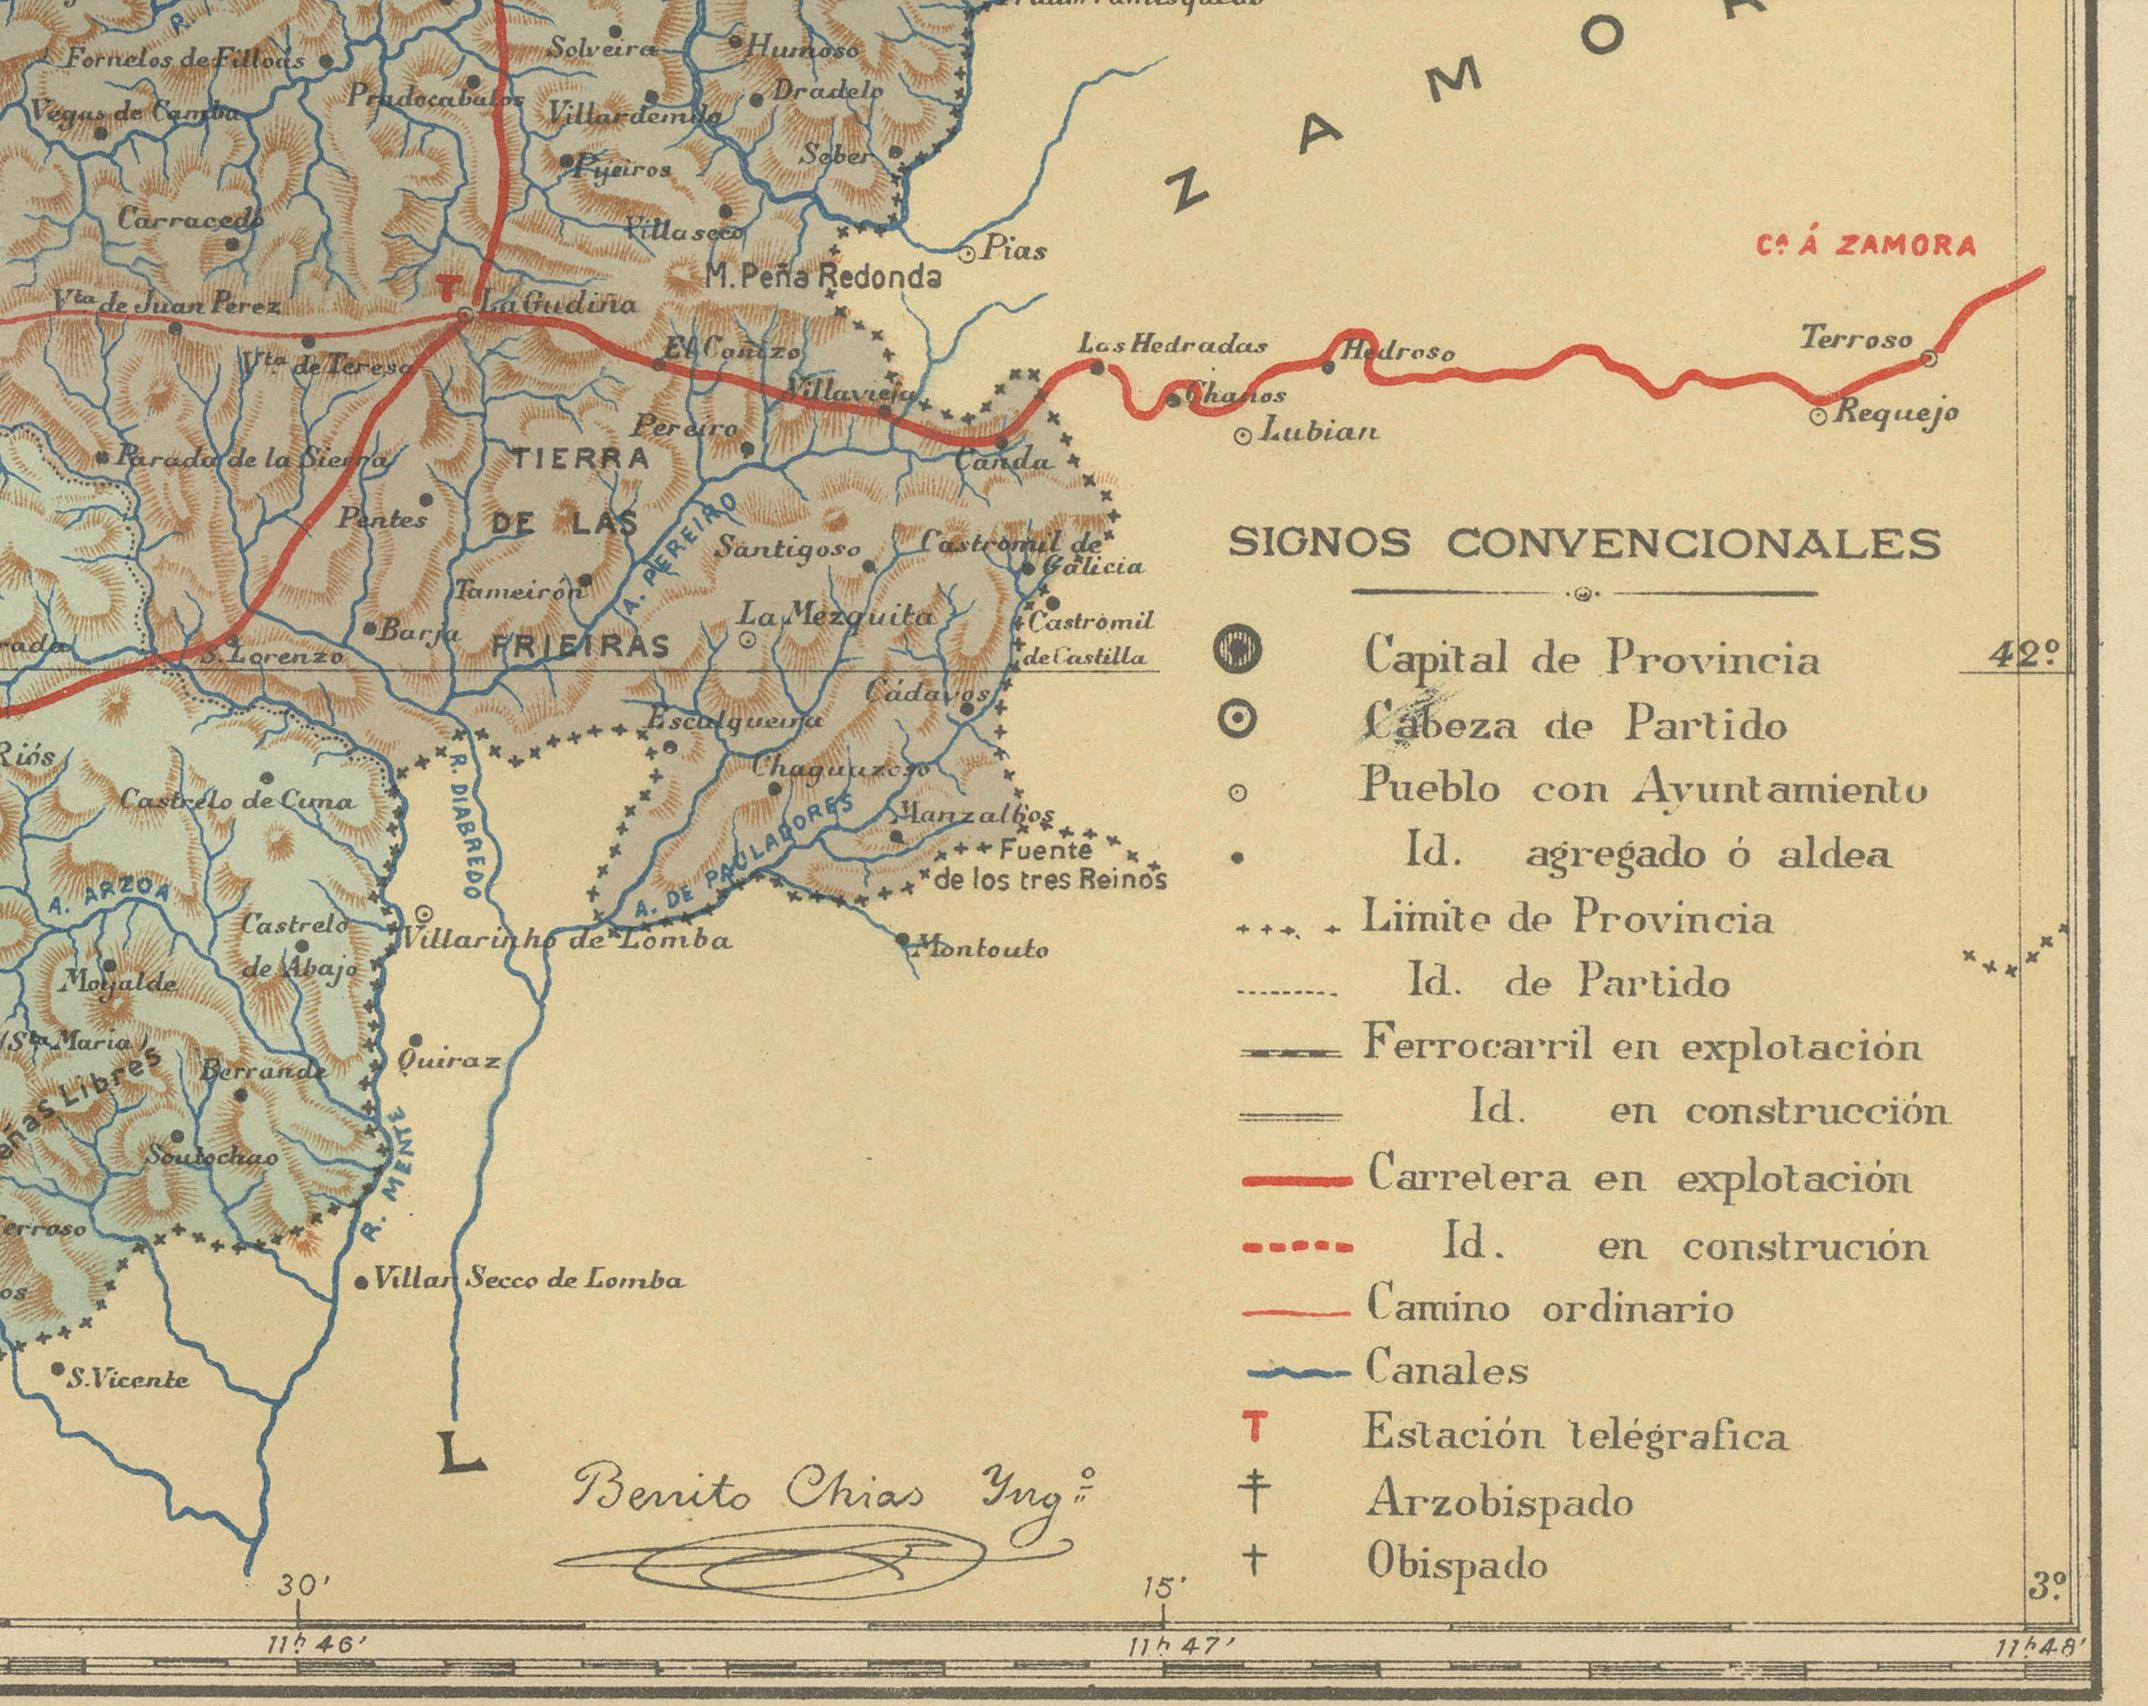 The map is a detailed cartographic representation of the province of Orense (Ourense in Galician), located in the northwest of Spain, as it was in 1902. Here's a brief description and a potential title for the map:

Description:
- The map is a